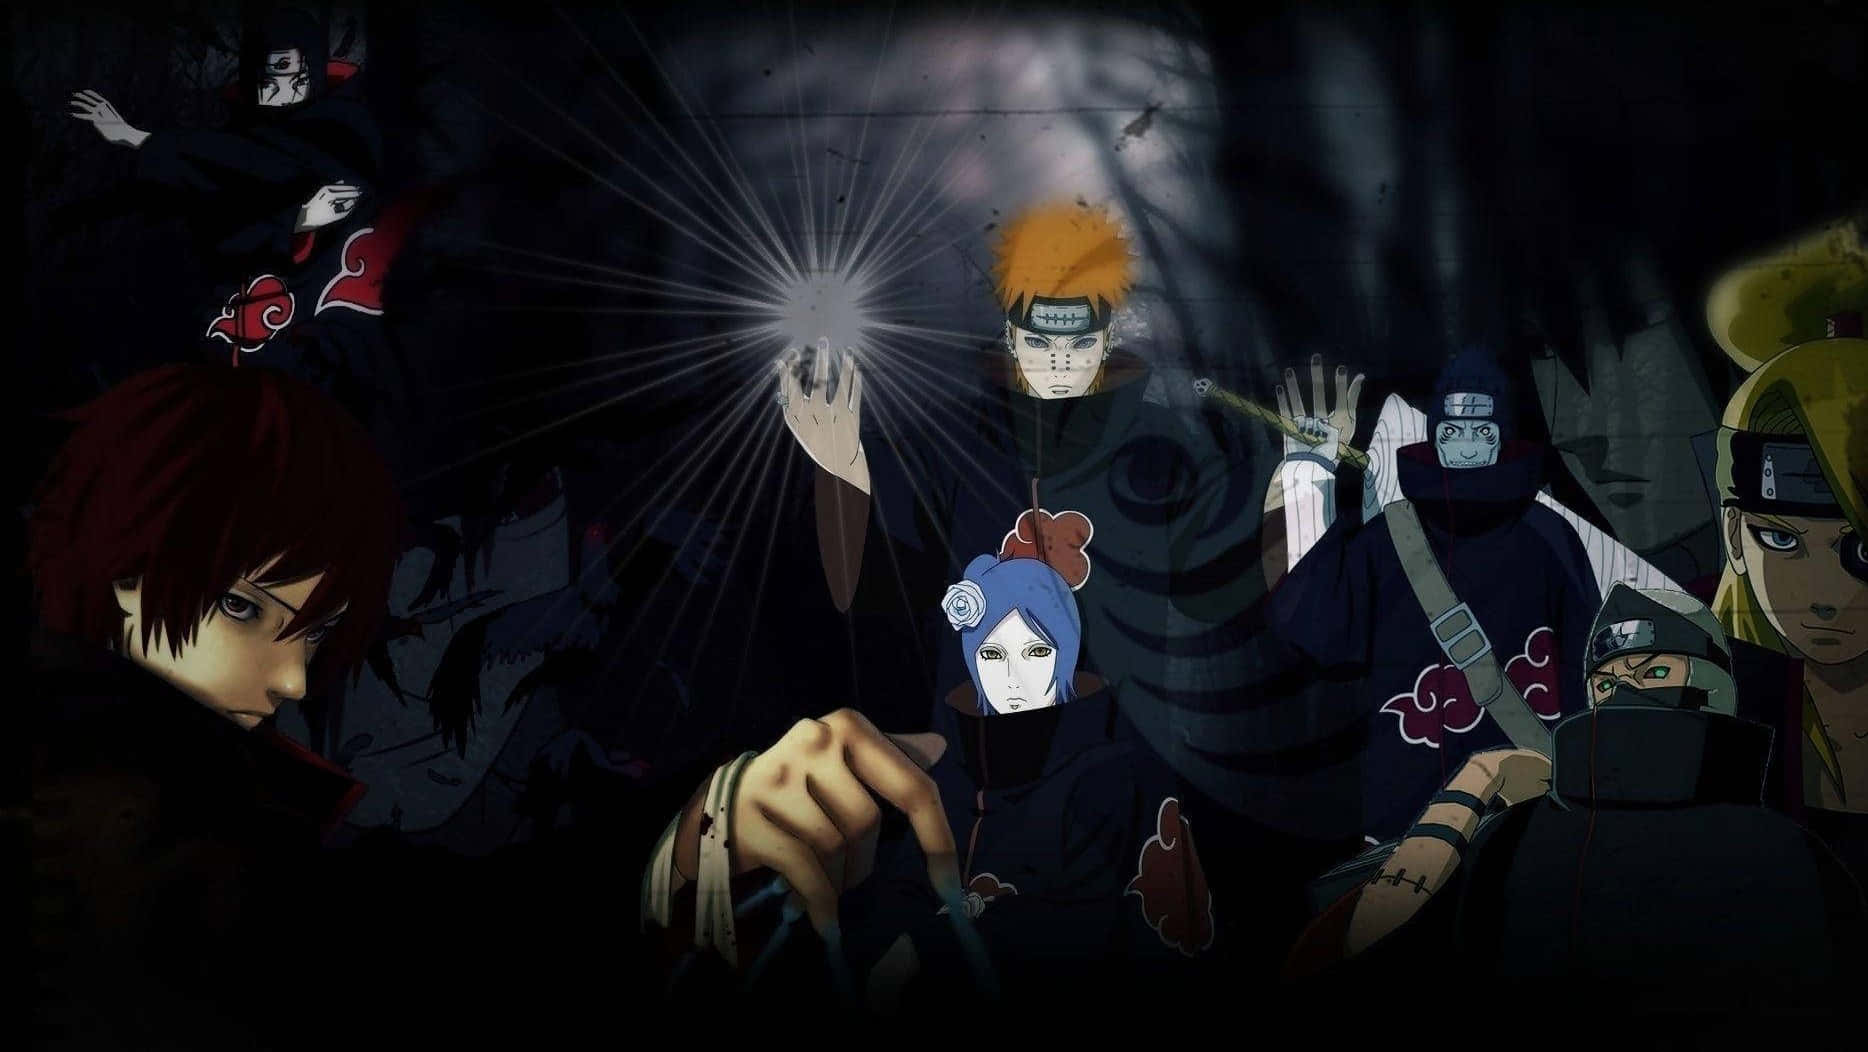 “The Power of the Naruto Group” Wallpaper